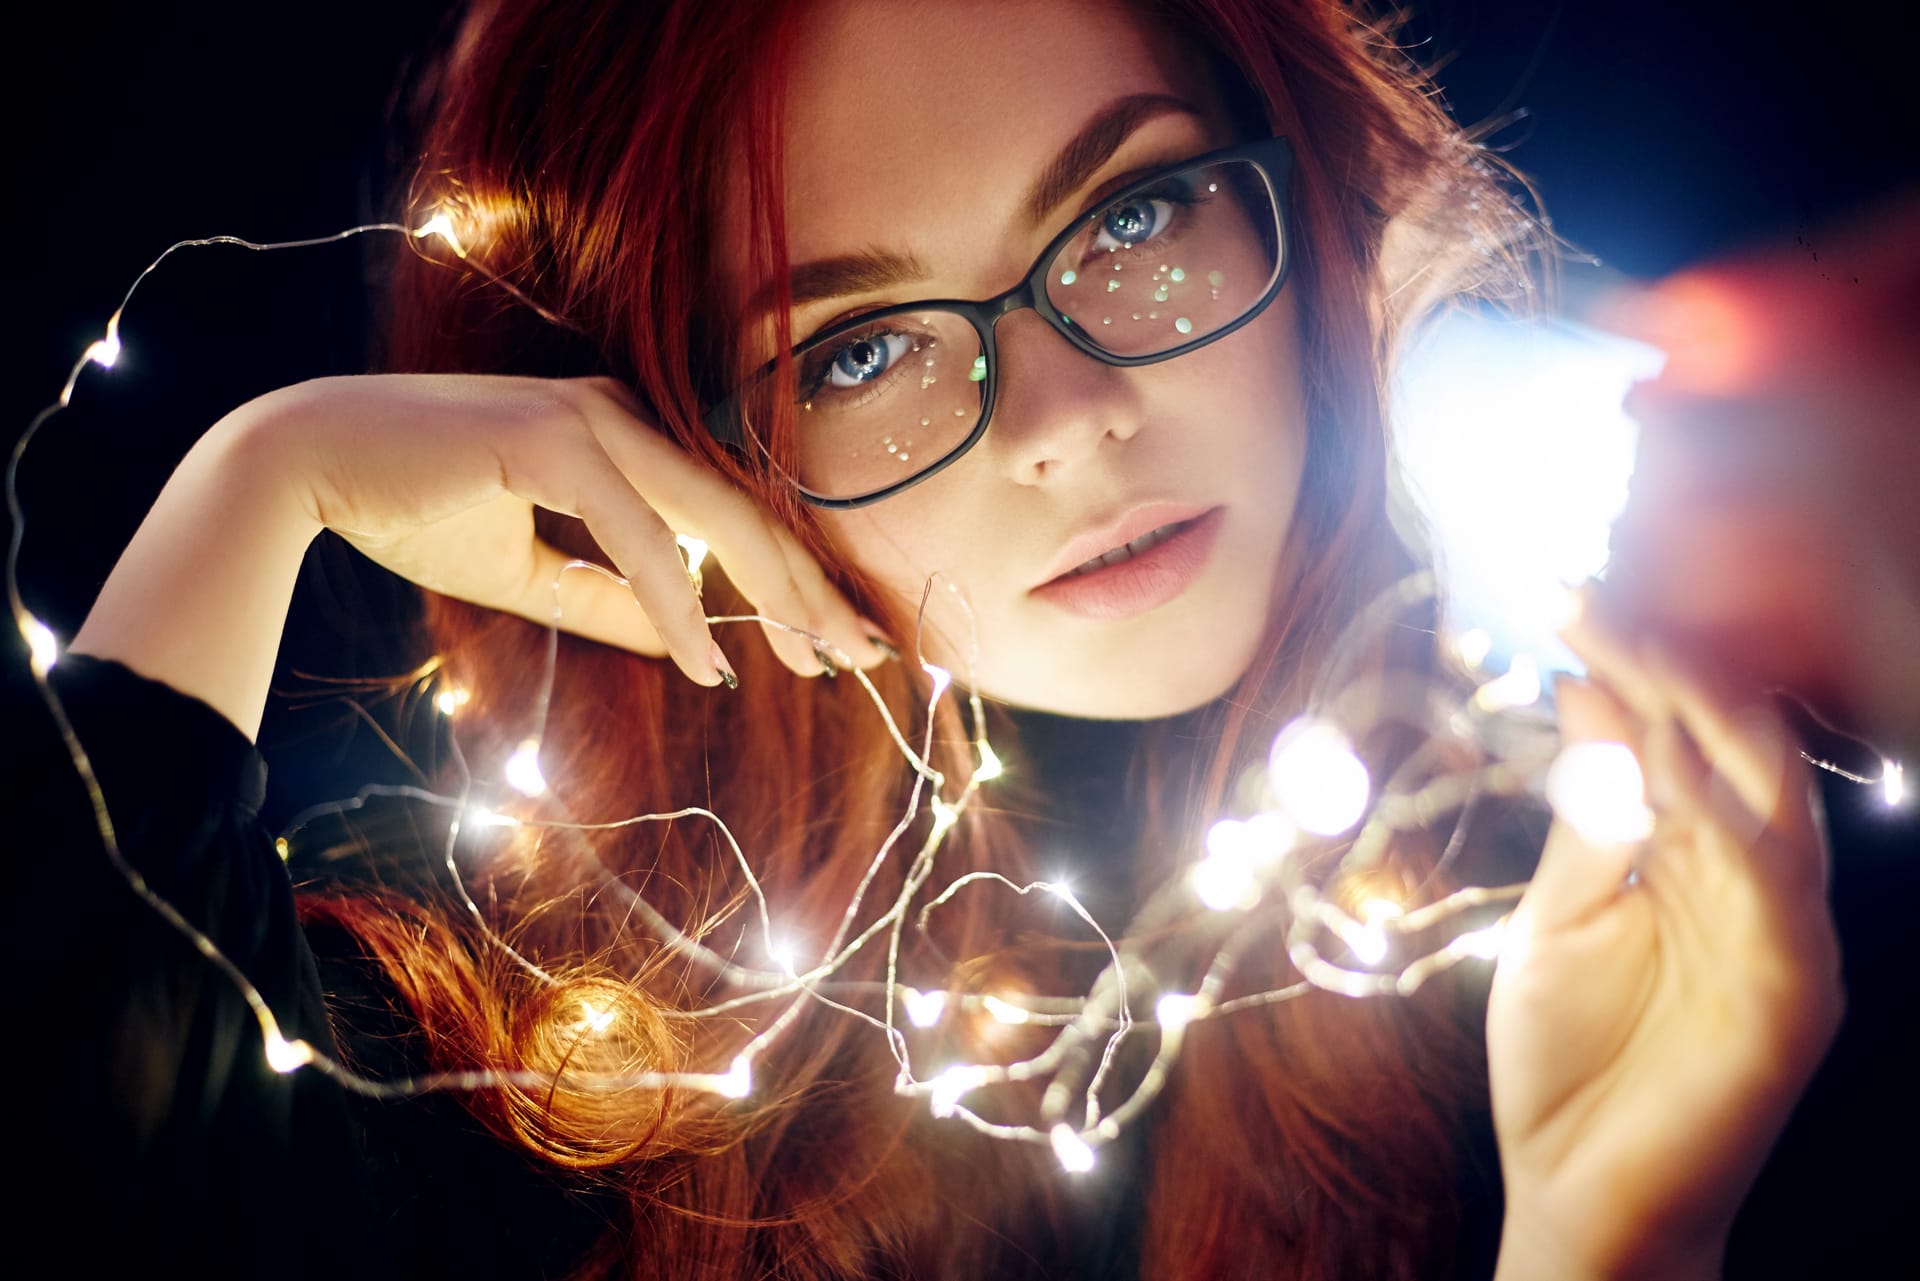 Portrait woman with red hair christmas lights pretty woman photos